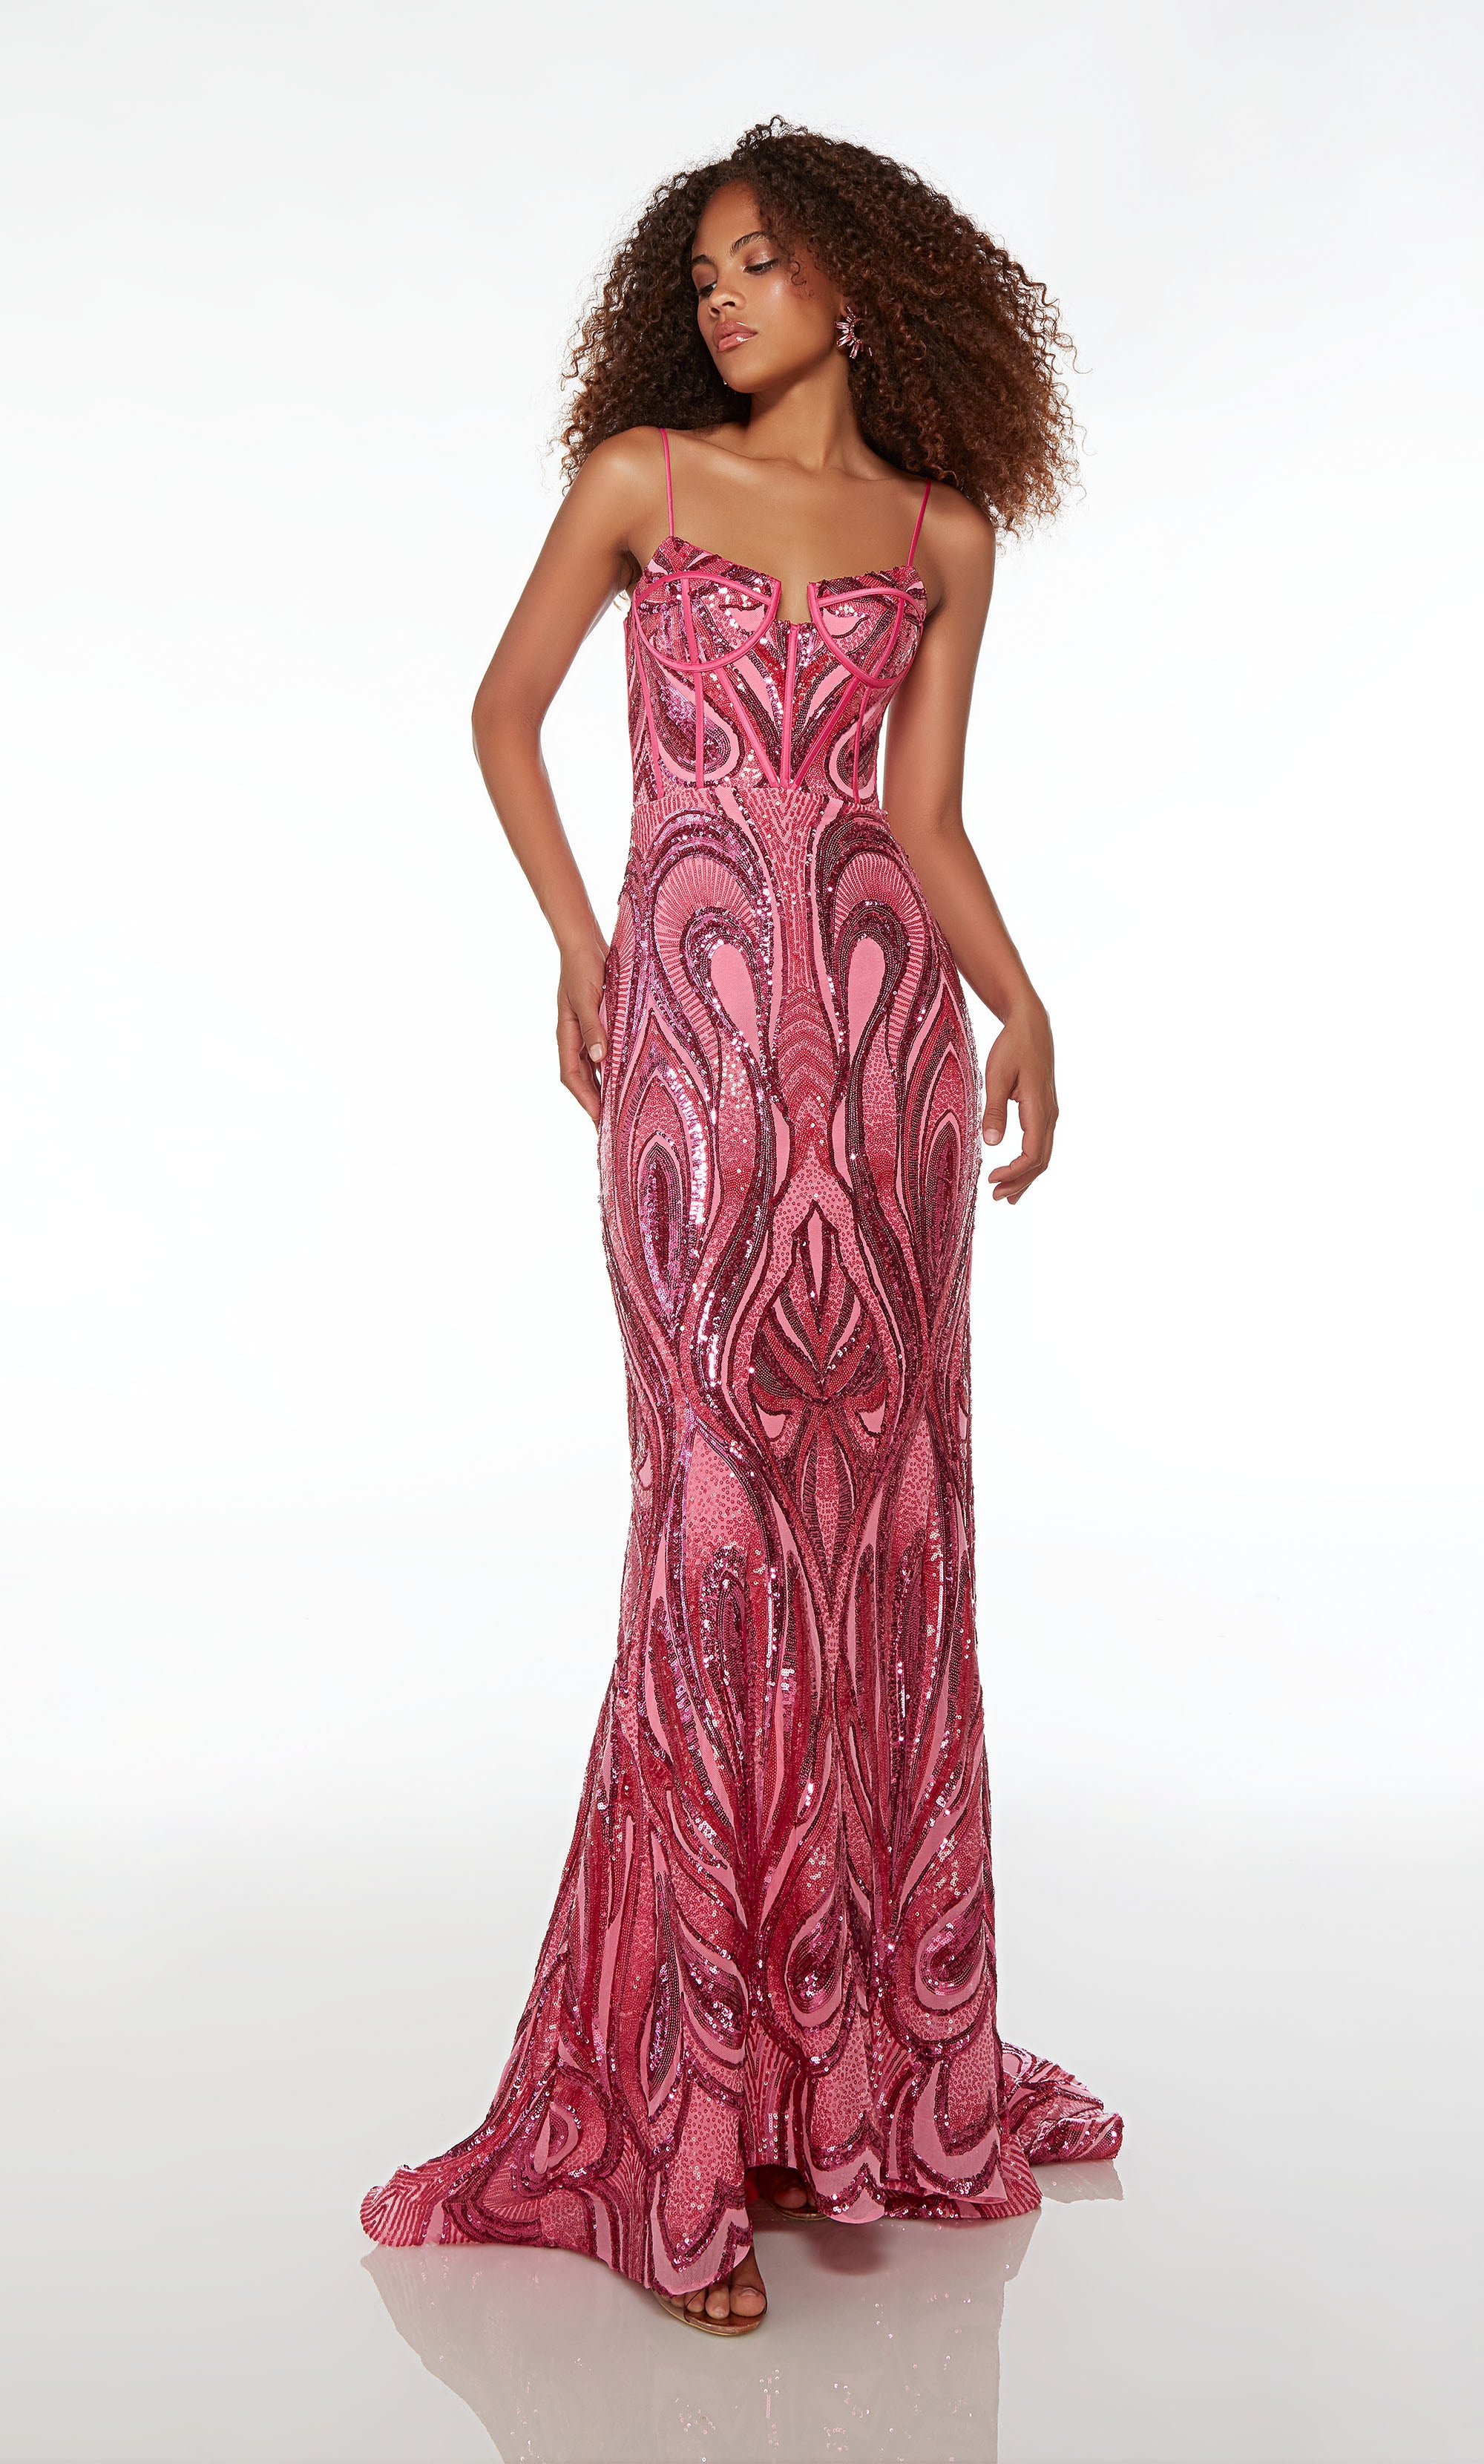 Discover more than 227 formal dress design for ladies super hot